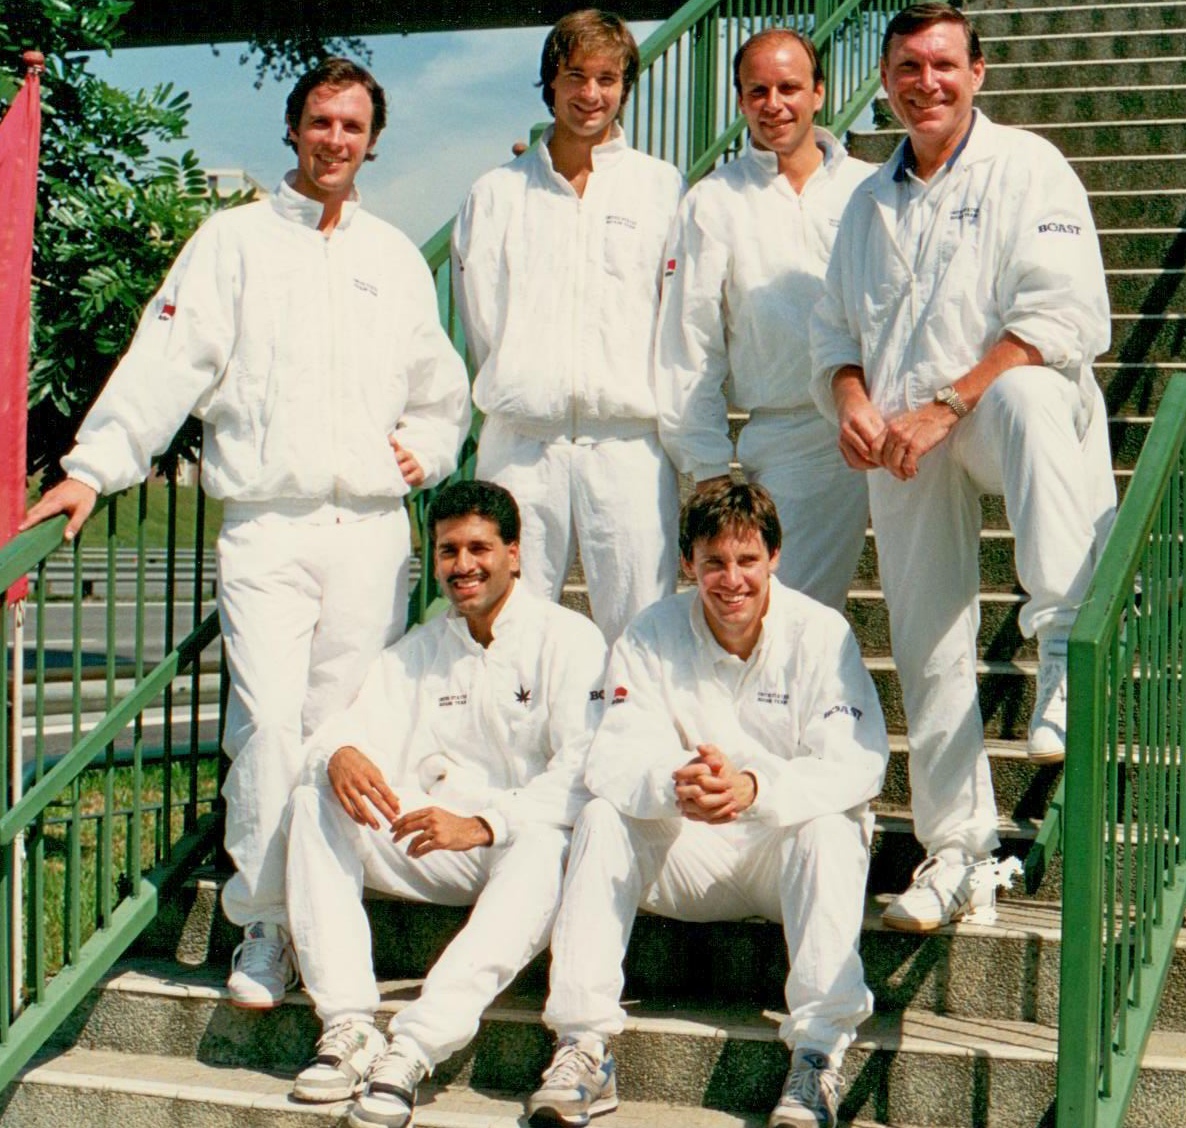 In 1989 he led the U.S. team at the World Championships in Kuala Lumpur (with, L-R, top row: Jernigan, Peter Briggs and Jack Herrick; bottom row Azam Khan and David Boyum).